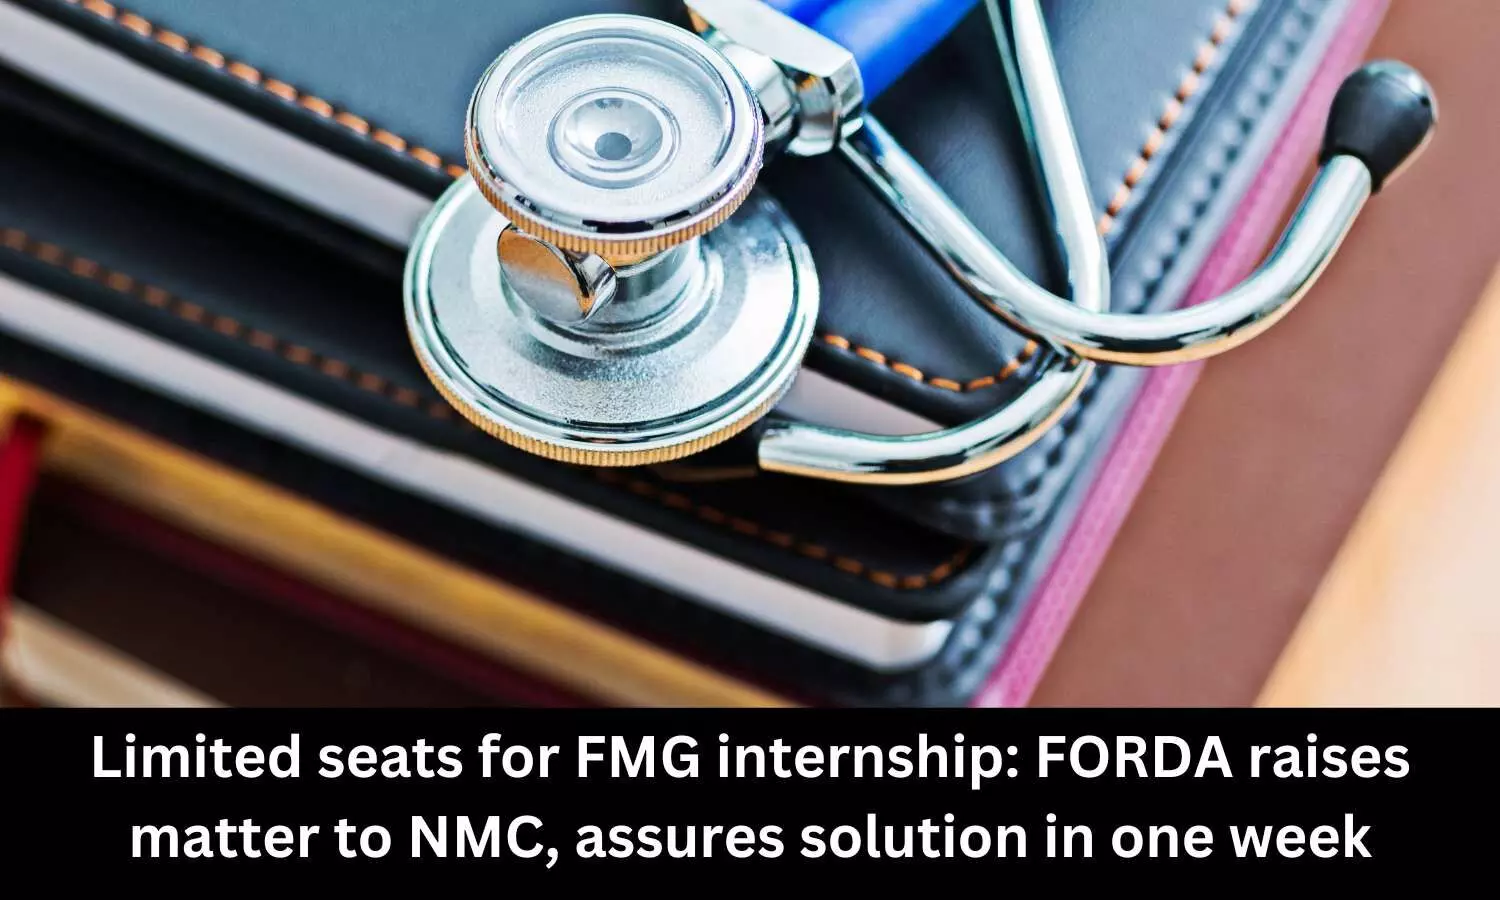 Limited number of internship seats for FMGs: FORDA raises matter to NMC